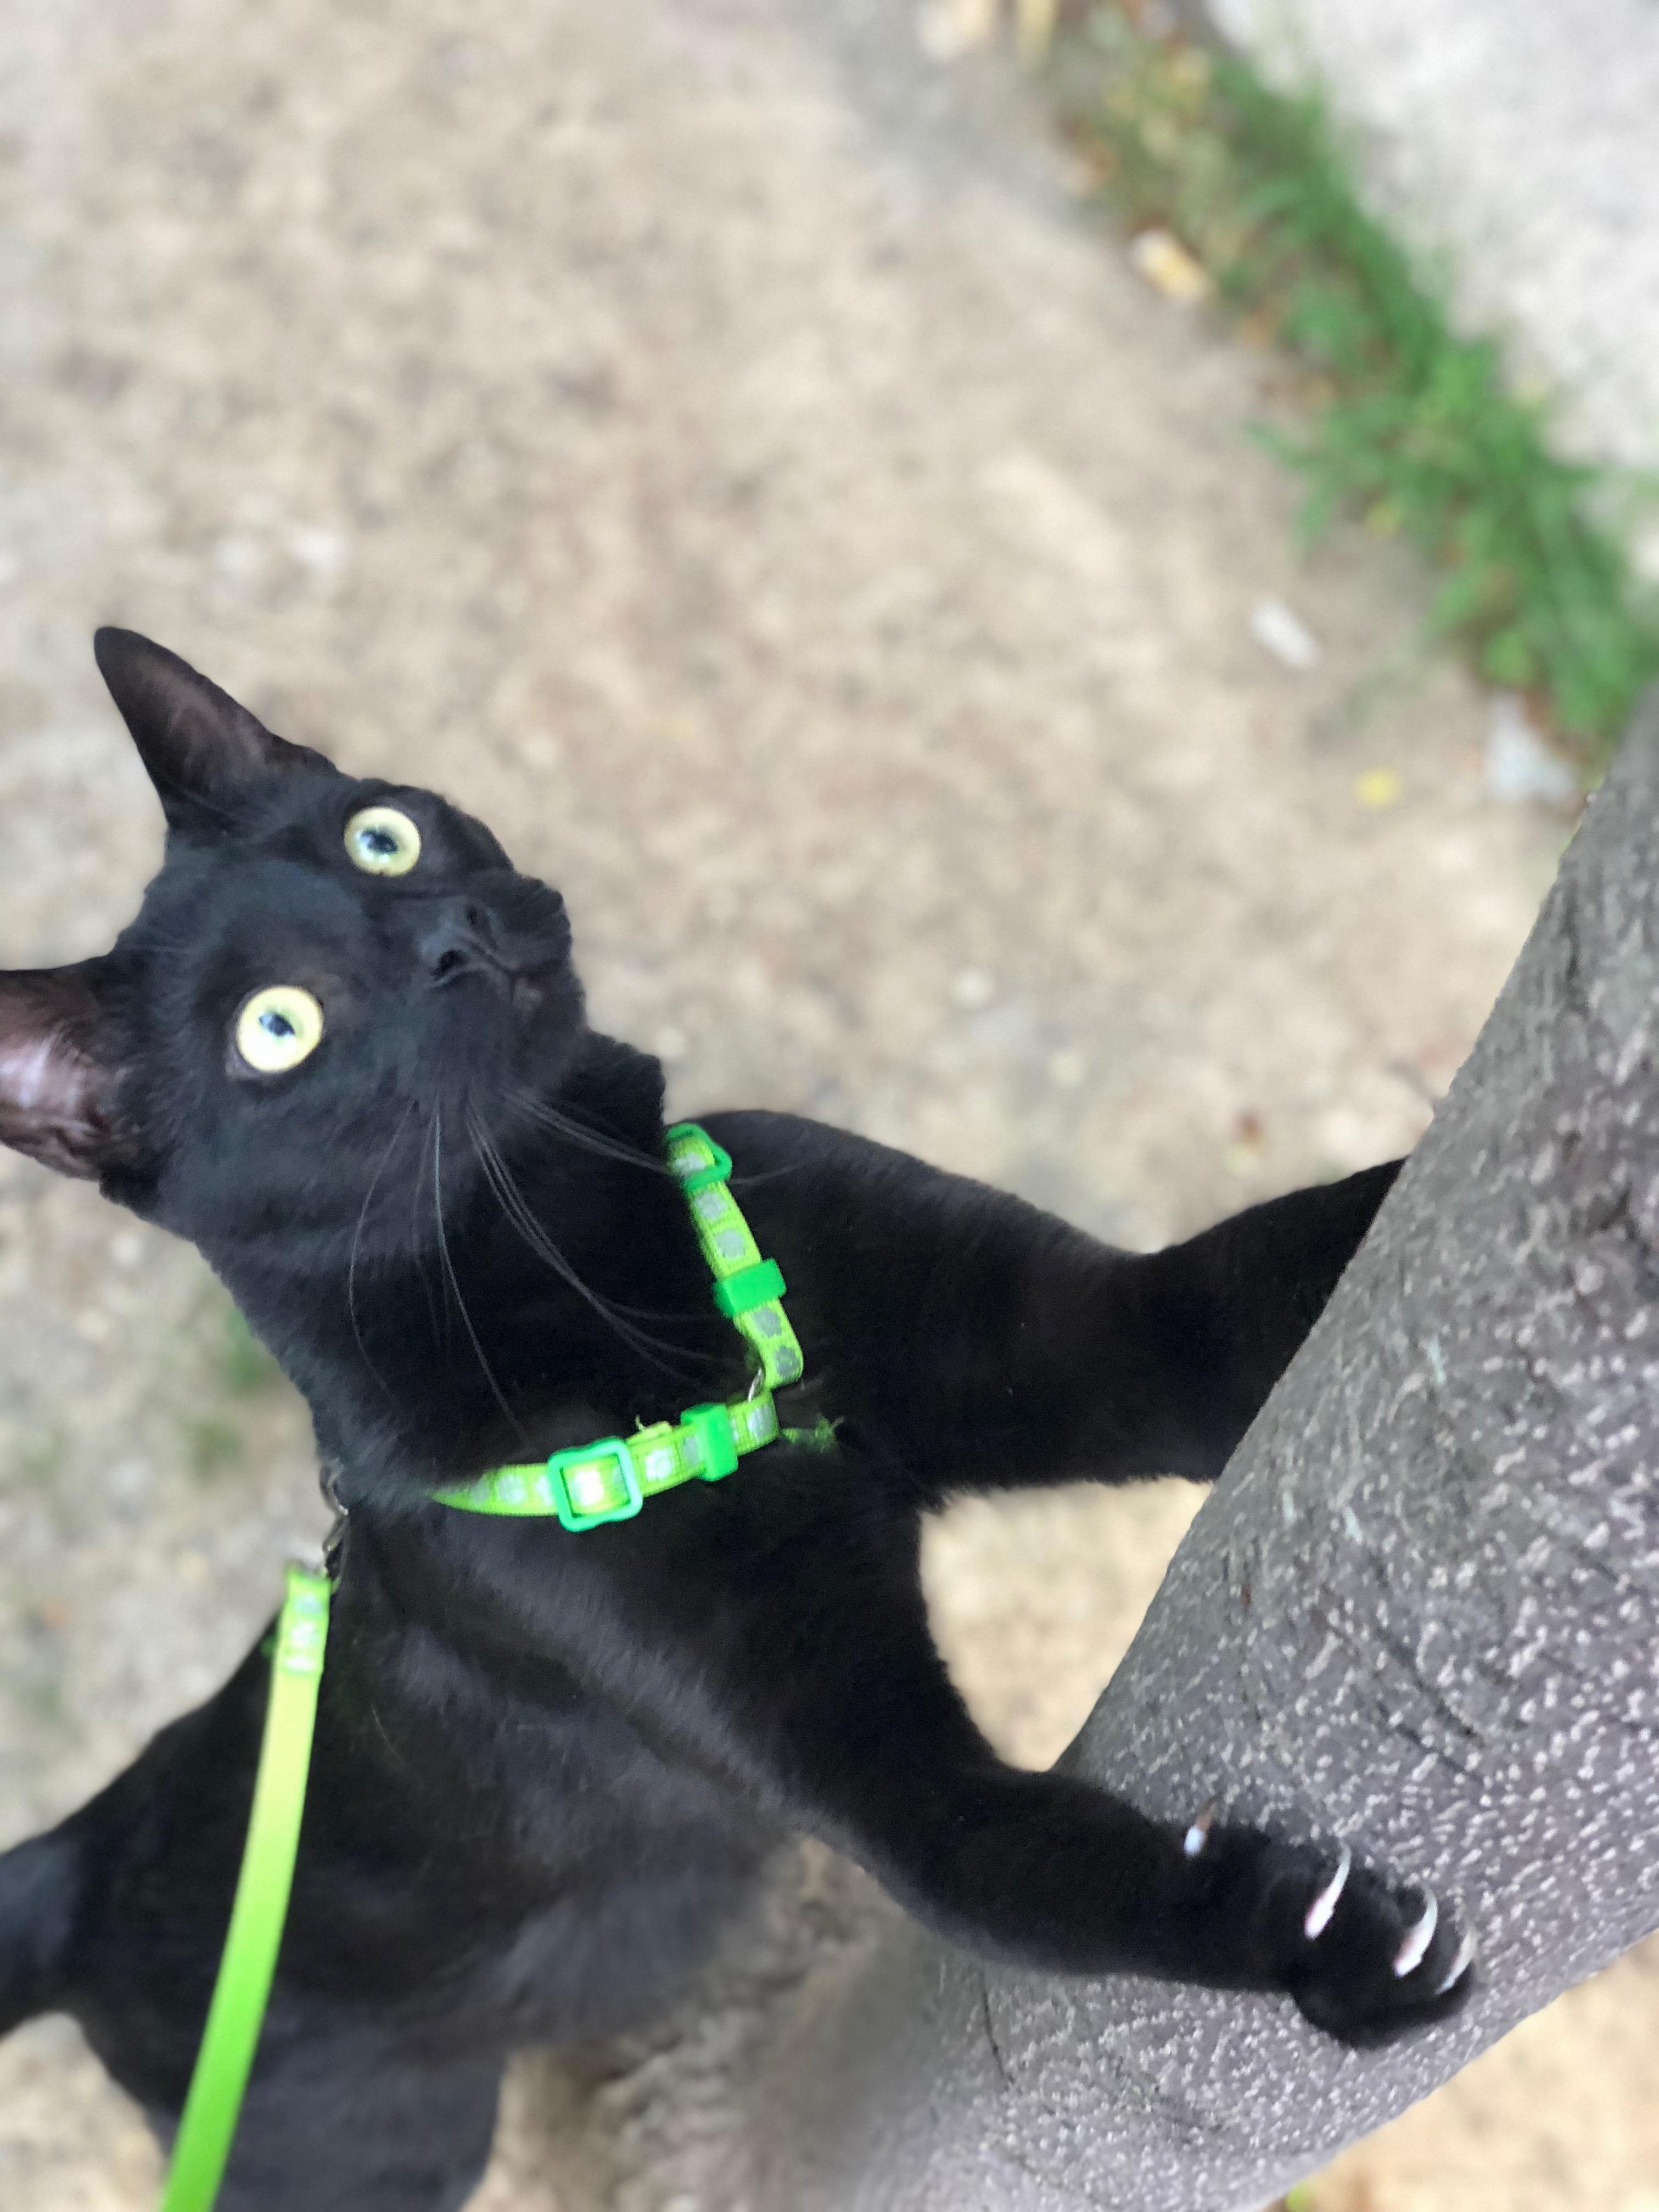 His first time outside on the leash!